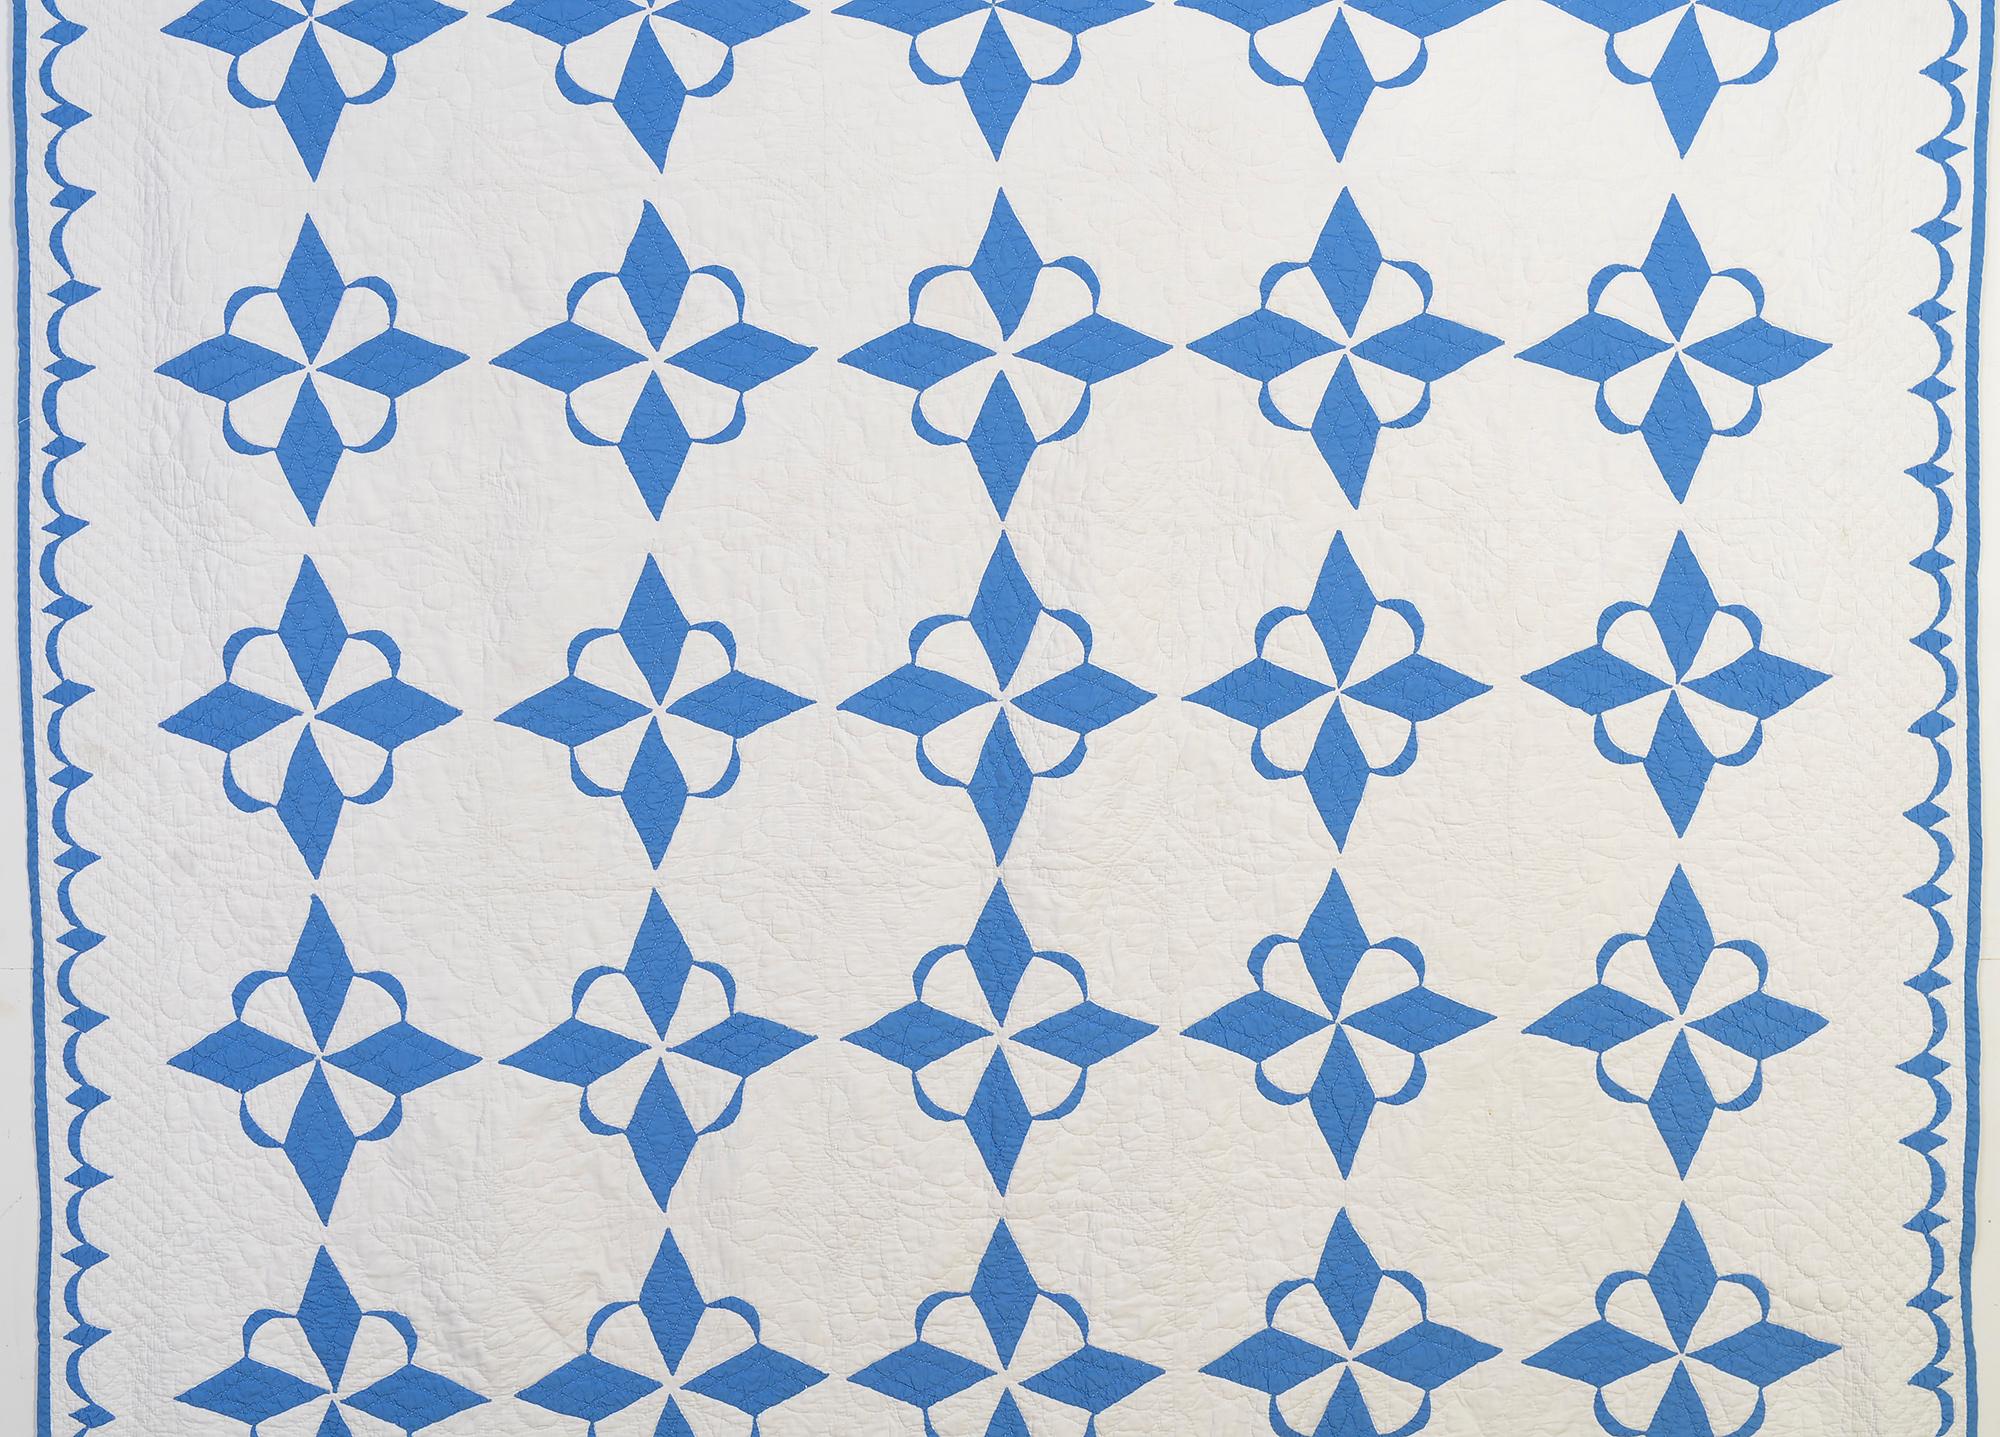 This unusual star variation goes by several names, most often Crescent Star or Star of the West. It is done in a beautiful shade of medium blue. It is well quilted with a variety of curvilinear designs. The border is a creative continuation of the